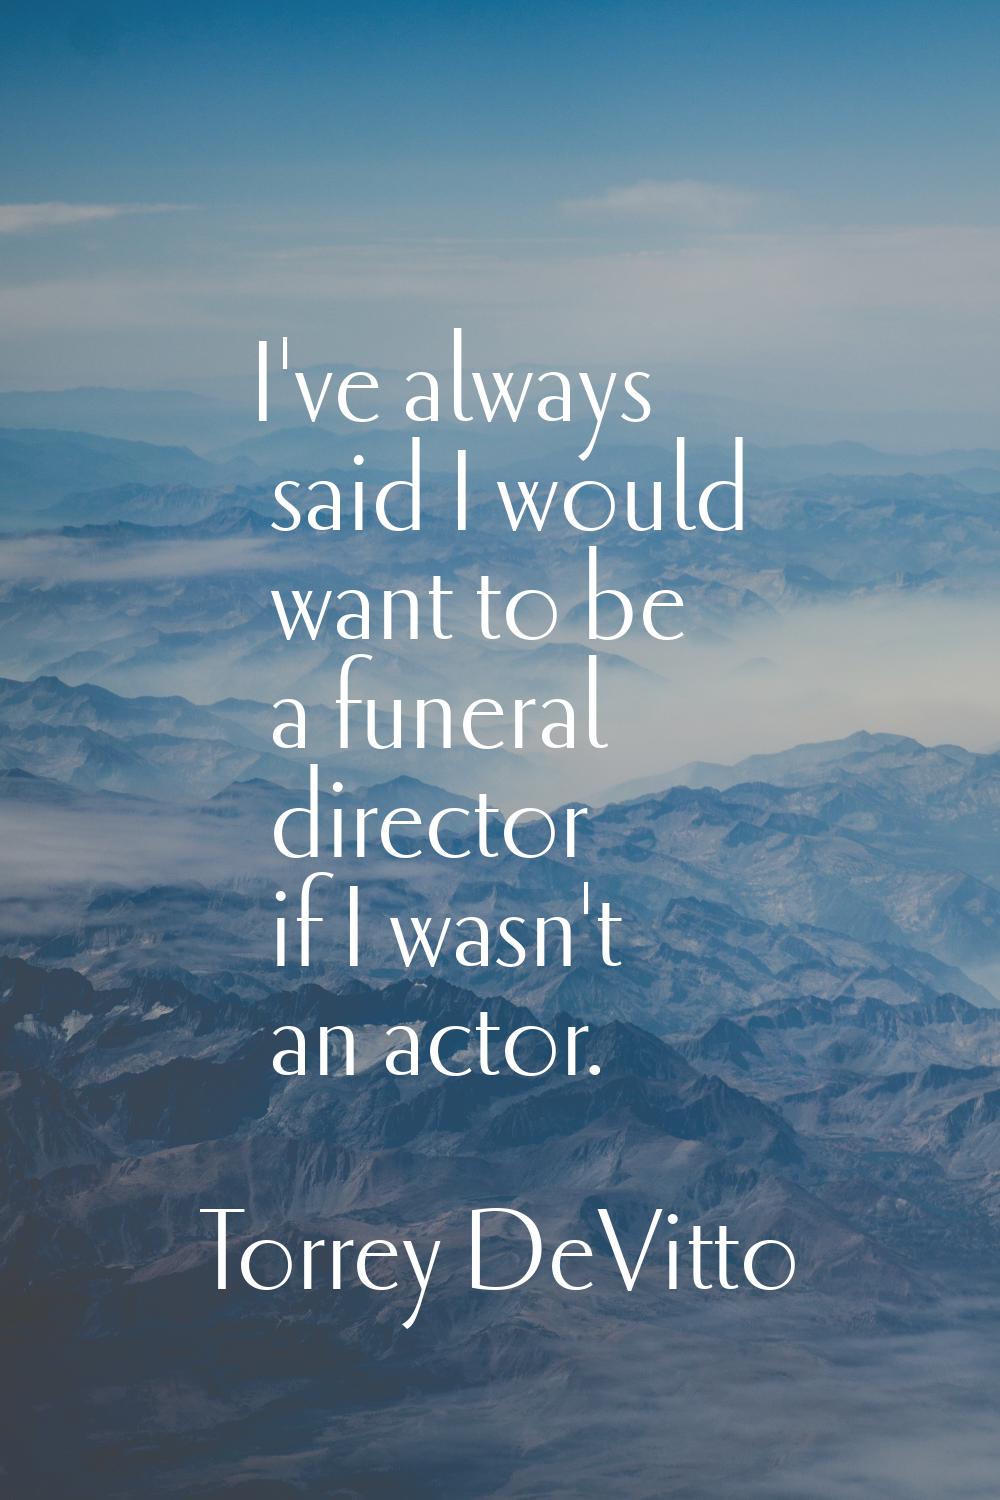 I've always said I would want to be a funeral director if I wasn't an actor.